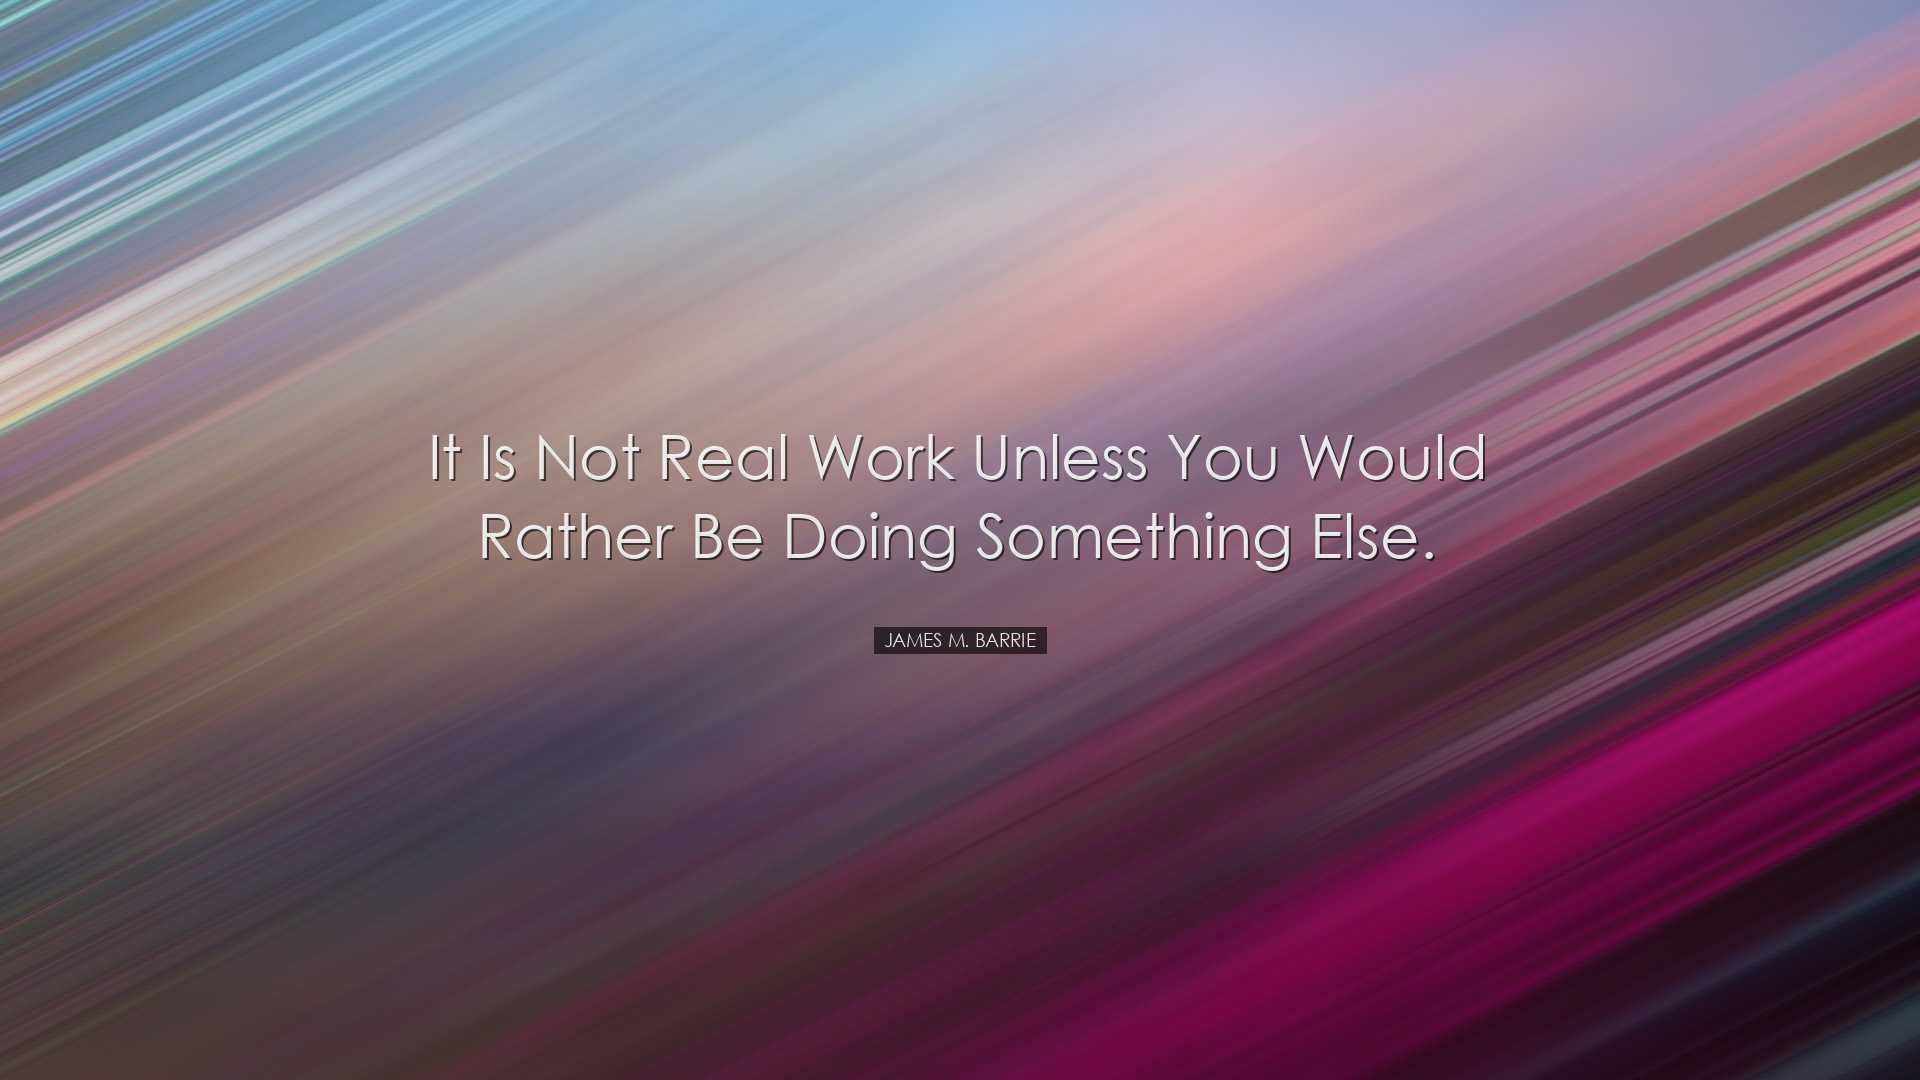 It is not real work unless you would rather be doing something els